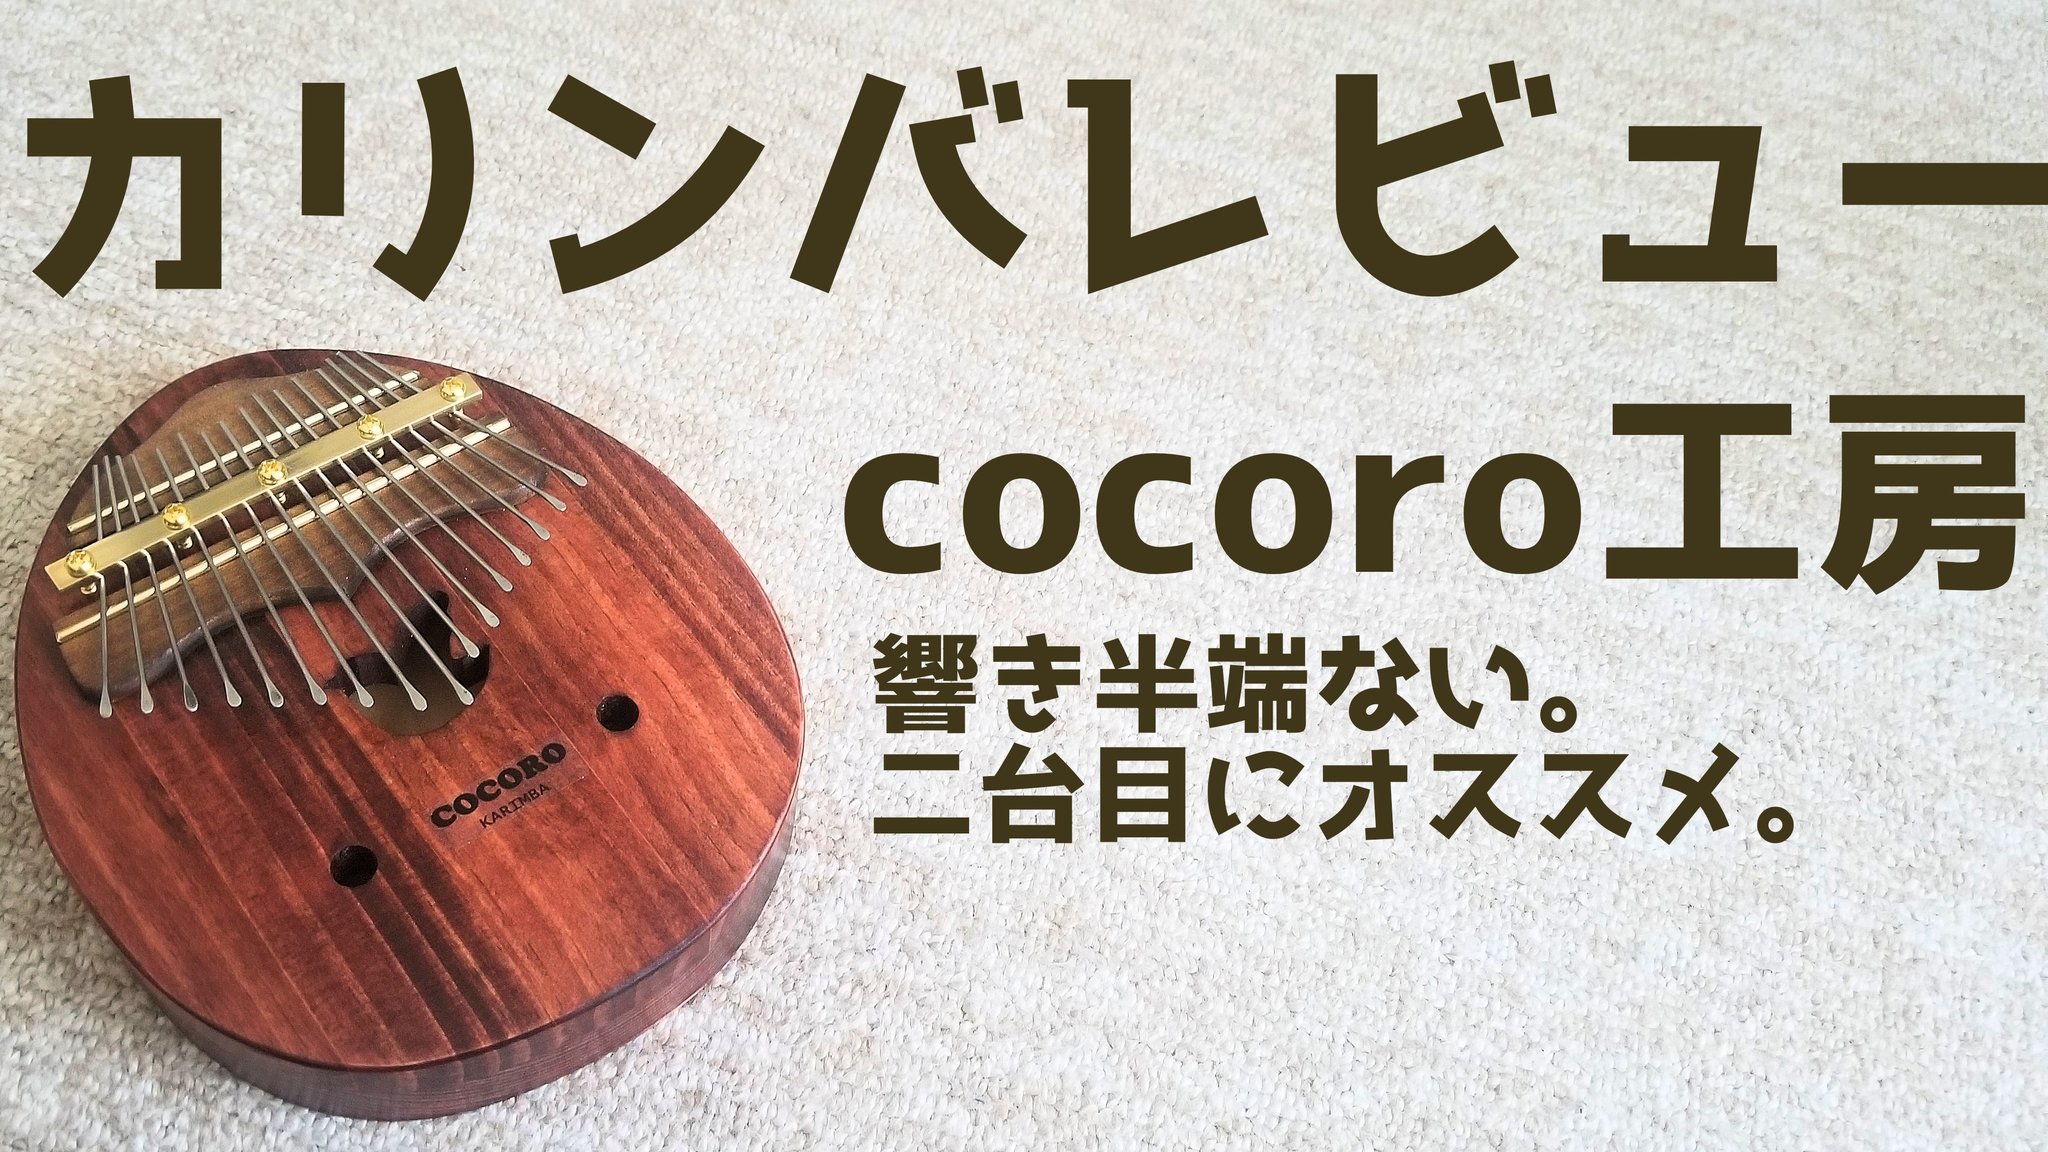 cocoro工房 - Twitter Search / Twitter